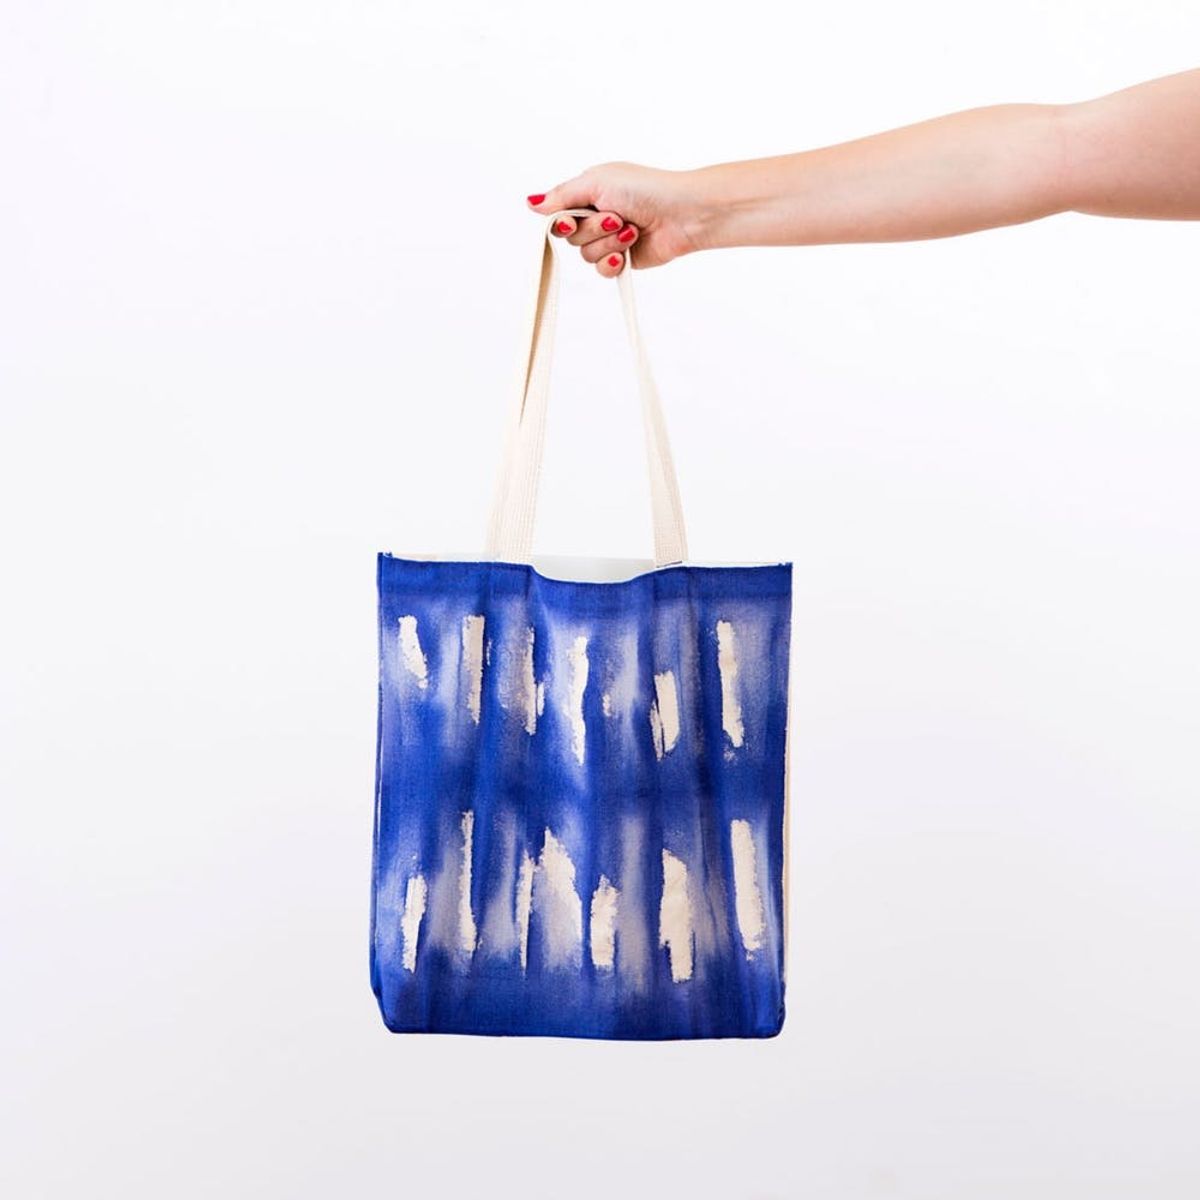 Like This Tote? Here’s How You Can Get It Free